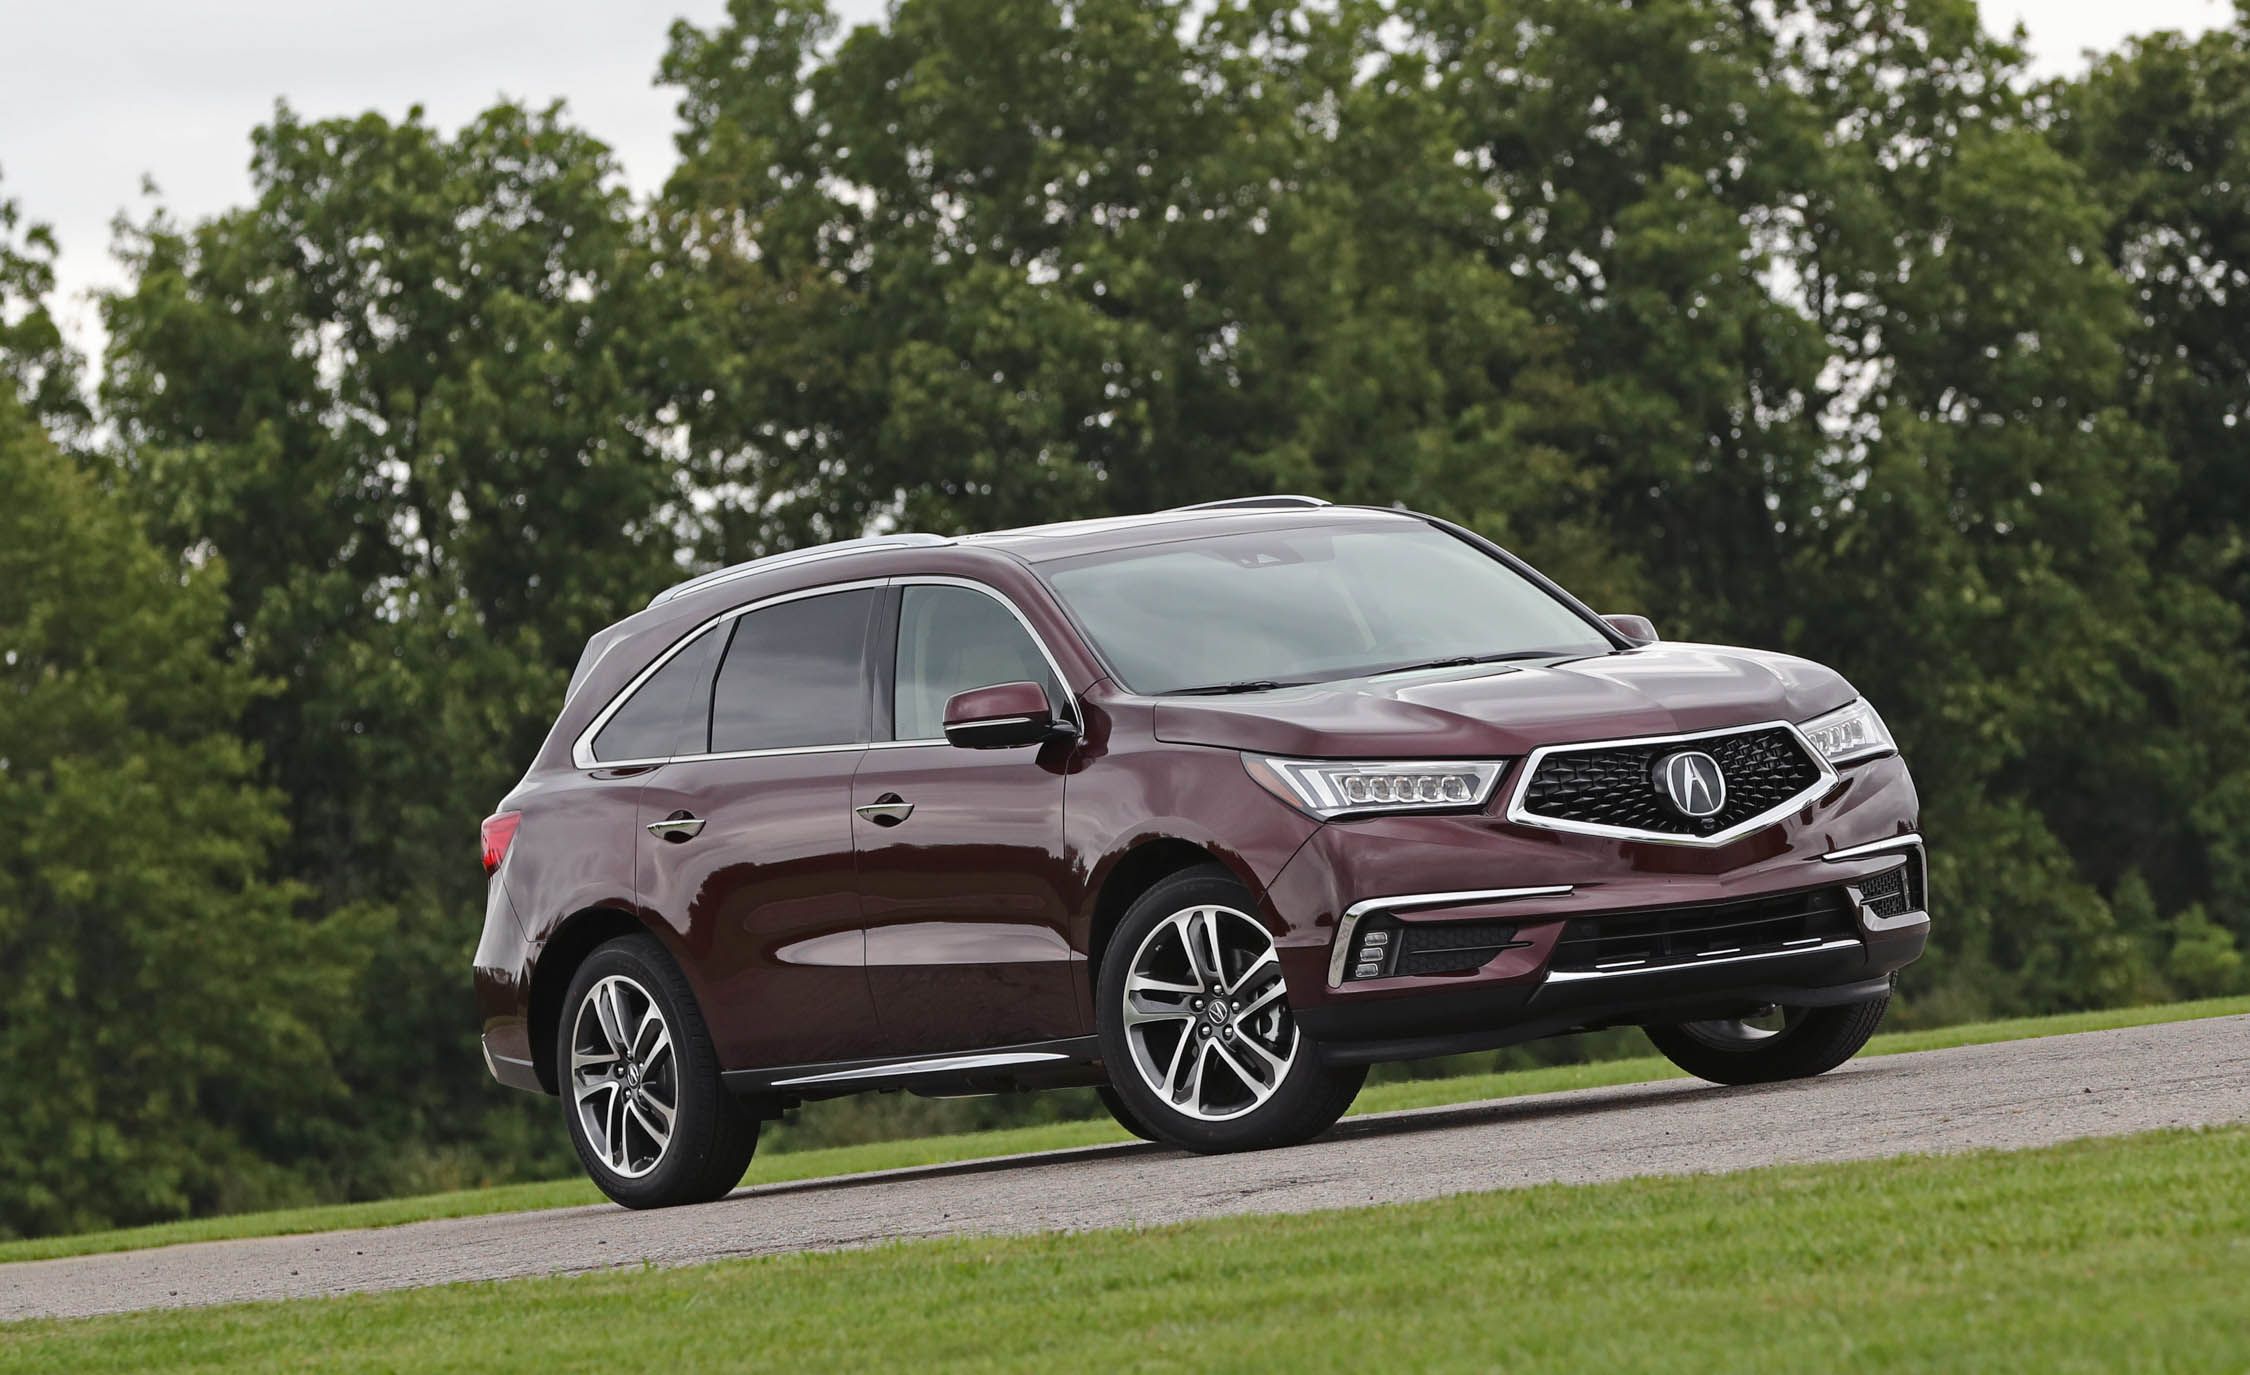 2017 Acura Mdx Exterior Side And Front (View 18 of 22)